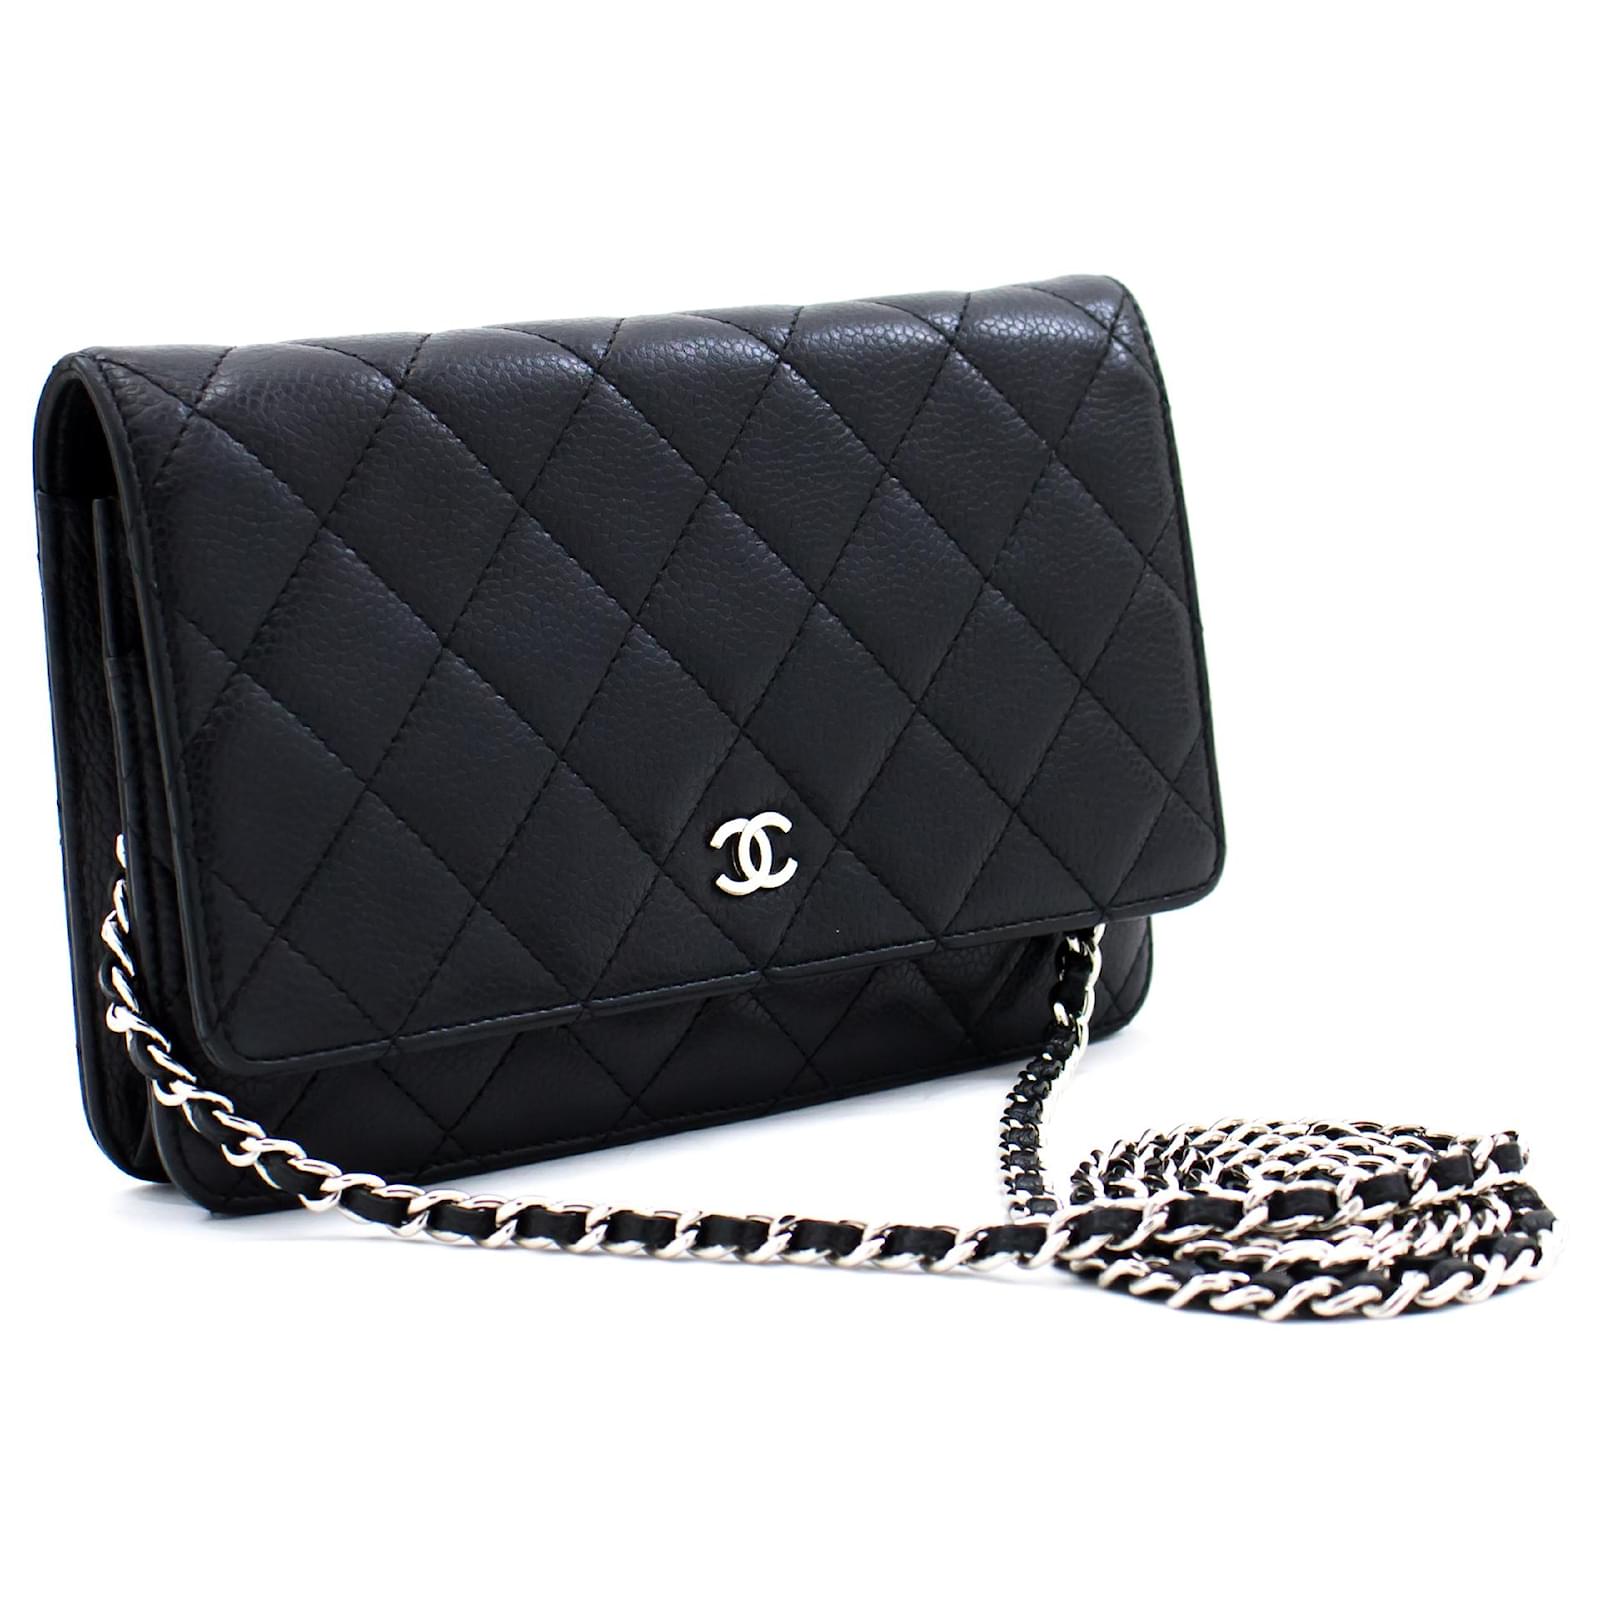 Chanel Black Lambskin Leather Camellia Embossed WOC (wallet-on-chain)  Clutch Bag